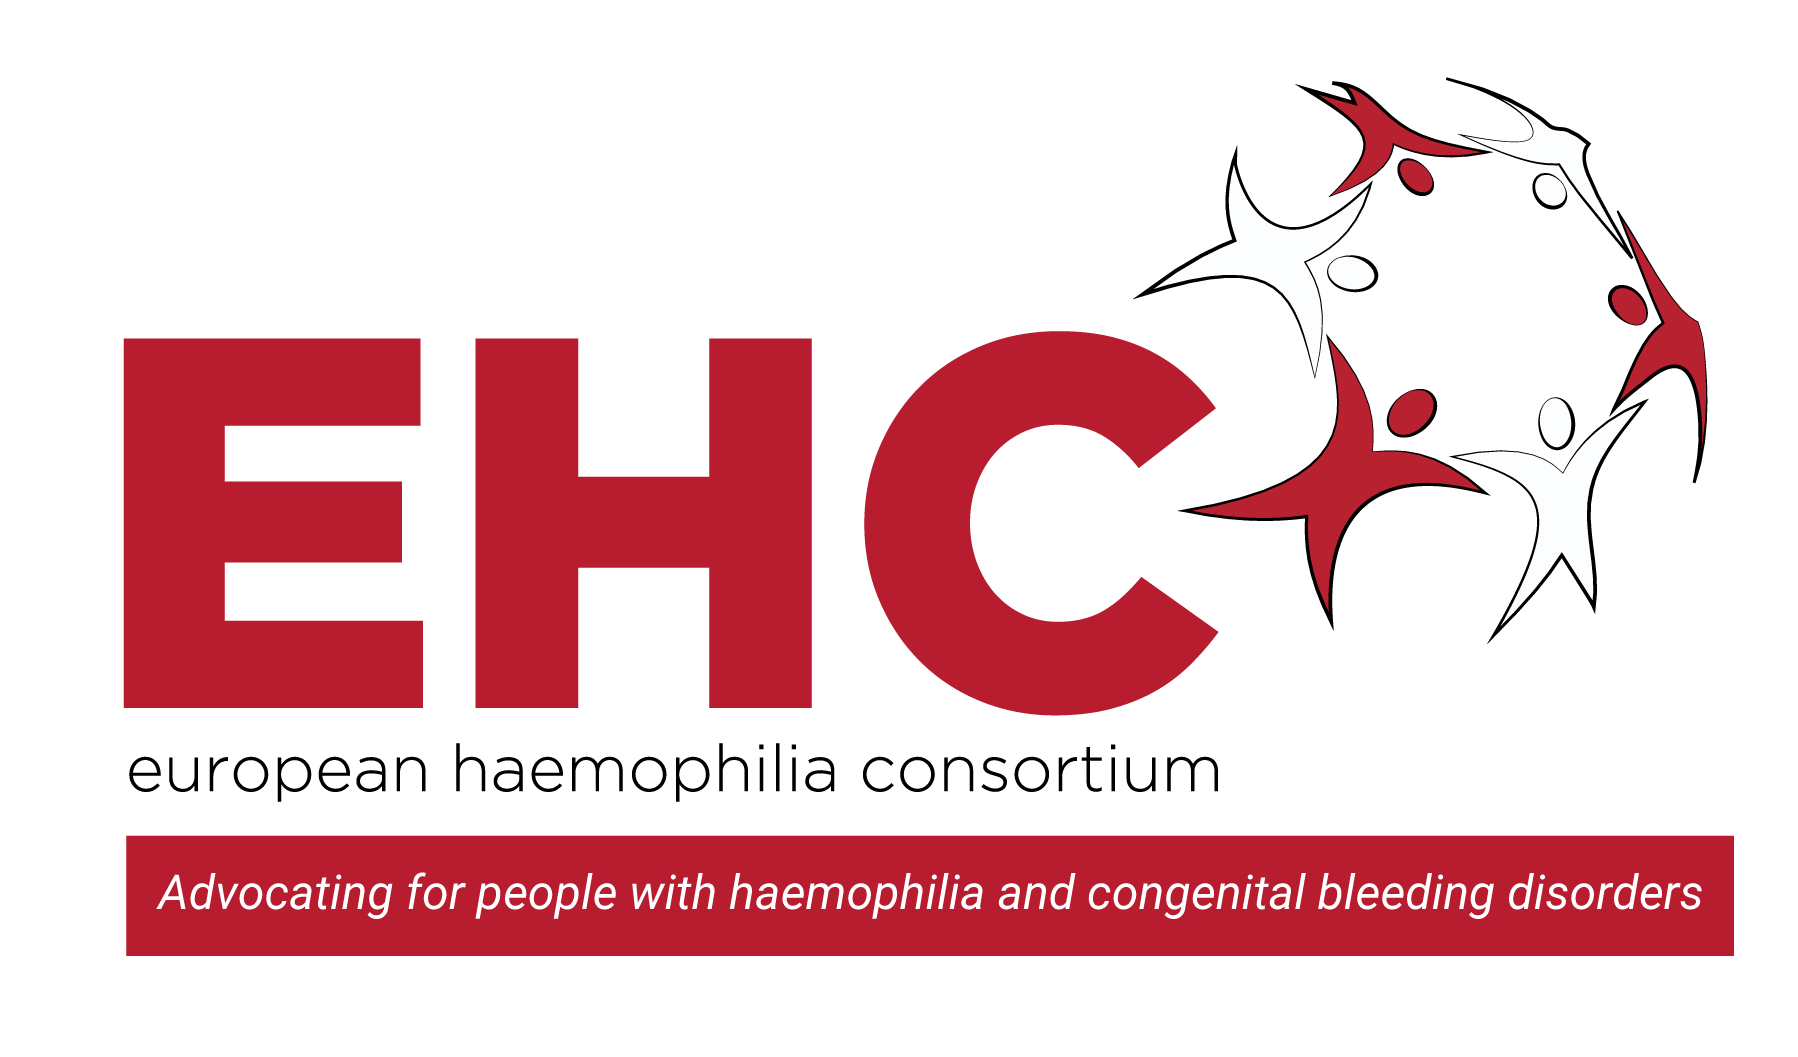 EHC – European Haemophilia Consortium - Advocating for people with haemophilia and congenital bleeding disorders - /events/ehc-webinar-on-raising-awareness-about-wbd-in-the-nmo/